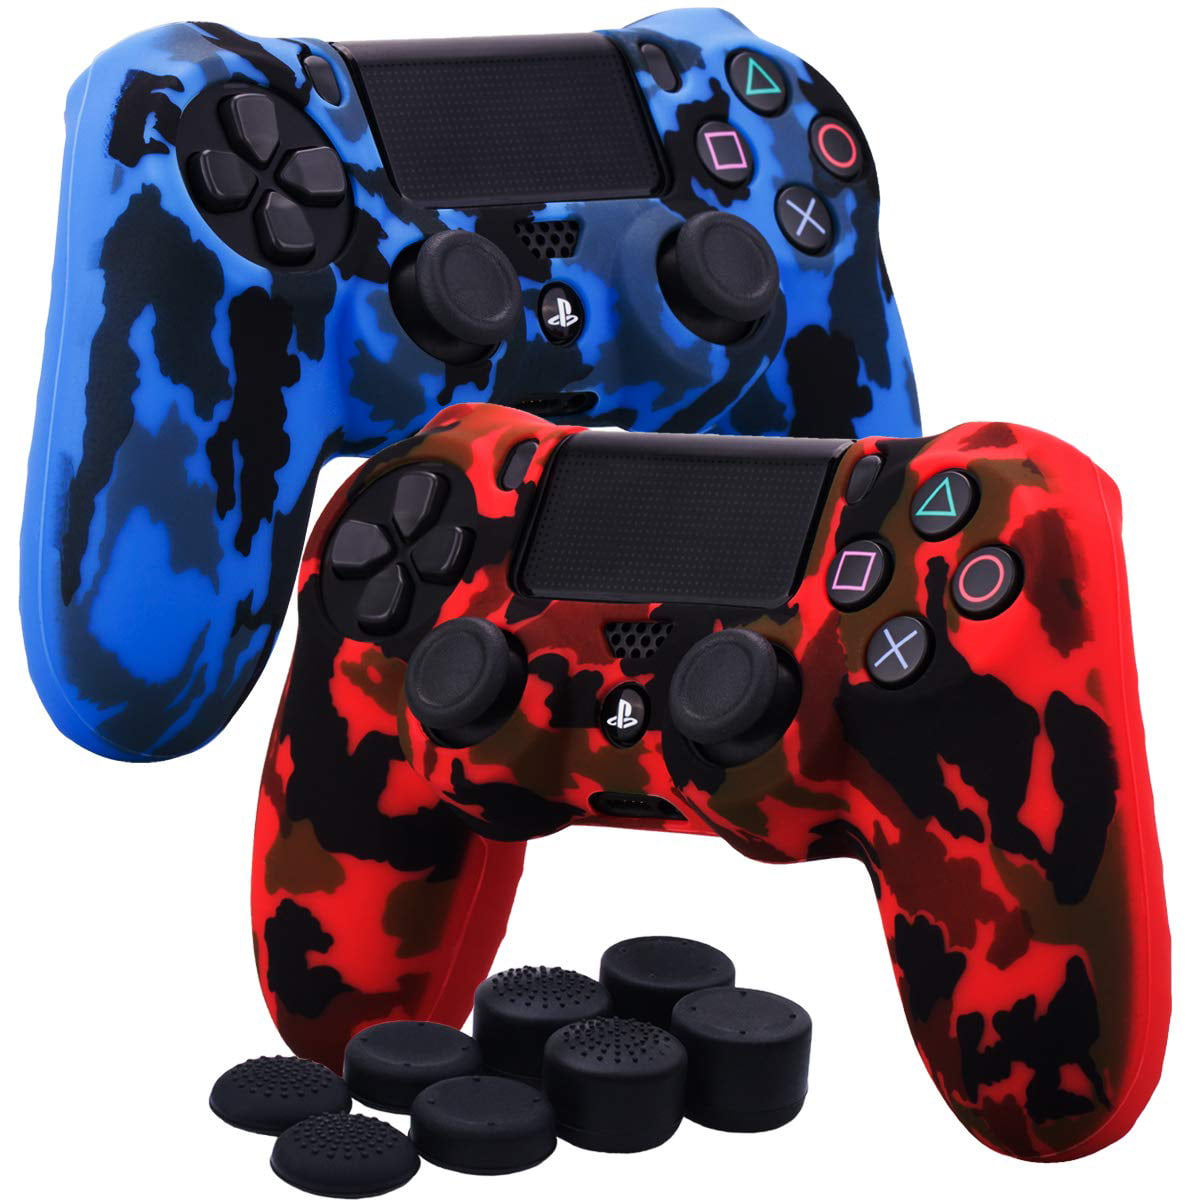 Water Transfer Printing Silicone Cover Skin Case for Sony PS4/slim/Pro Dualshock 4 Controller x 2 red+Blue with Pro Thumb Grips x 8 - Walmart.com